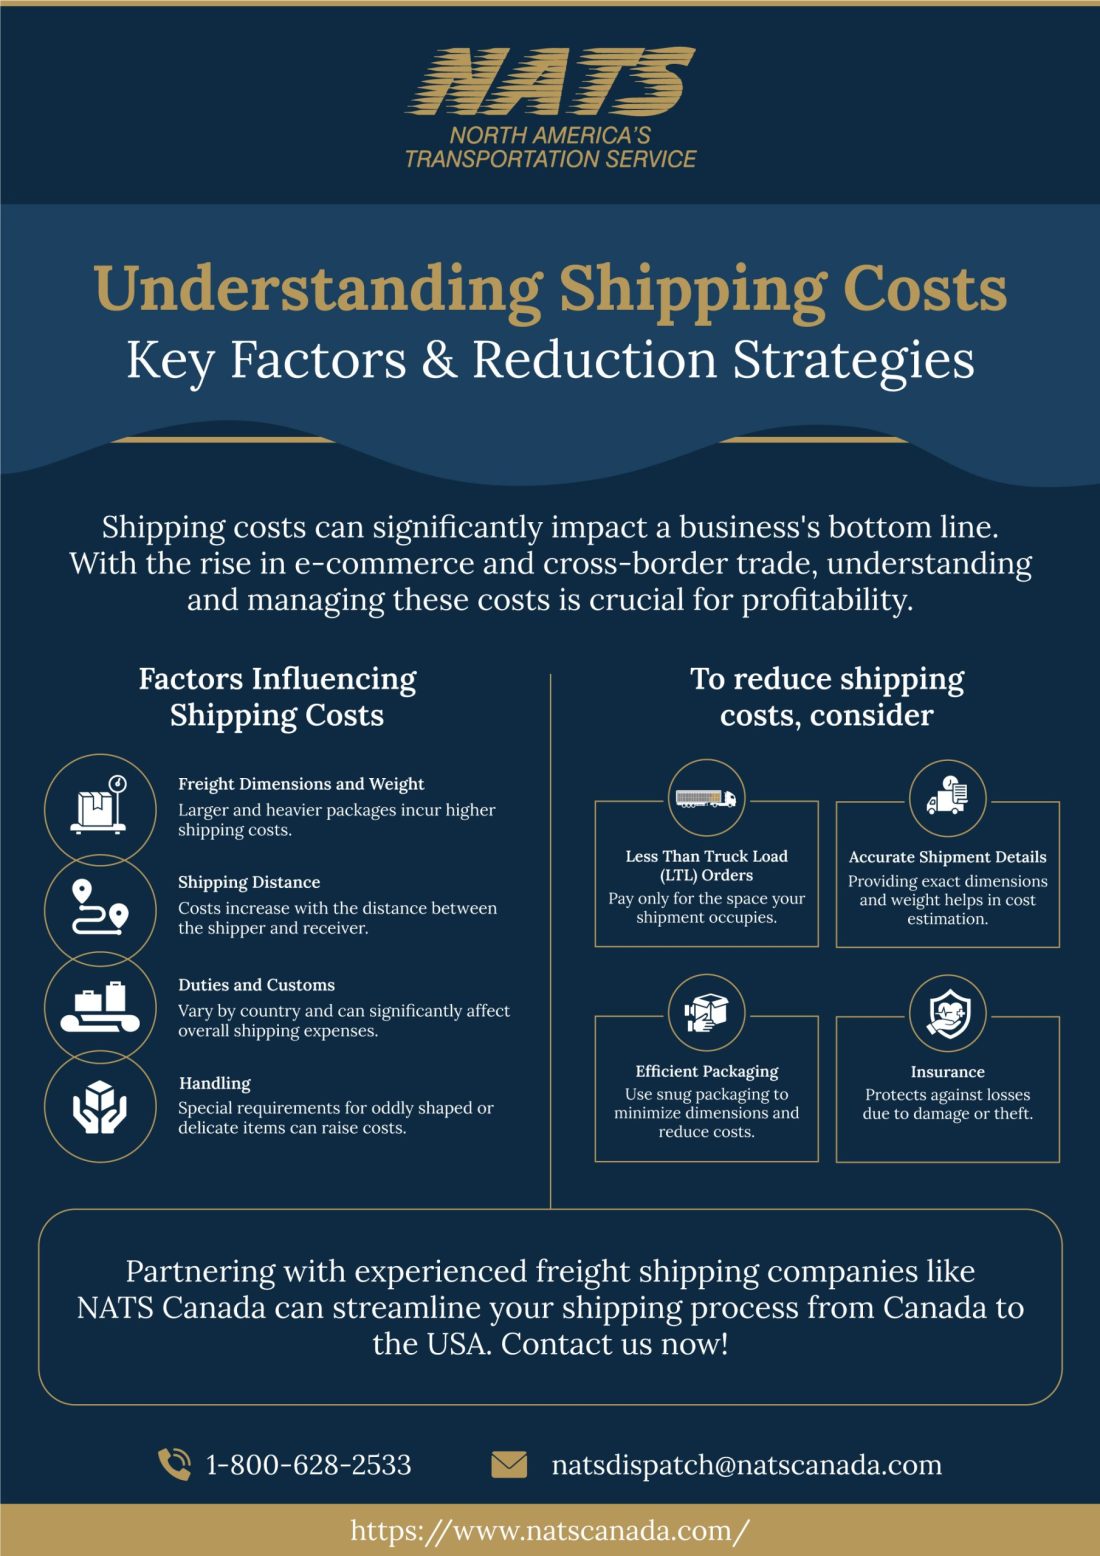 EL FA)

NORTH AMERICA'S
TRANSPORTATION SERVICE

Understanding Shipping Costs
Key Factors &amp; Reduction Strategies

 

 

Shipping costs can significantly impact a business's bottom line.
With the rise in e-commerce and cross-border trade, understanding
and managing these costs is crucial for profitability.

Factors Influencing
Shipping Costs

Freight Dimensions and Weight
Larger and heavier packages incur higher
shipping costs.

Shipping Distance
Costs increase with the distance between
the shipper and receiver.

PIELER GETTY
Vary by country and can significantly affect
FE a a

RTE
Special requirements for oddly shaped or
delicate items can raise costs

 

To reduce shipping
costs, consider

—

iL)

\ J

Less Than Truck Load
(LTL) Orders

SRT
Rp

py
Efficient Packaging
Use snug packagi

RR EZ RU TY
[Saat

I
and

 

 

yr N\
ND

Accurate Shipment Details
ct dimensions
ps in cost

  

[Eee
Protects against losses
amage or theft

 

Partnering with experienced freight shipping companies like
NATS Canada can streamline your shipping process from Canada to
the USA. Contact us now!

Q 1-800-628-2533

4 natsdispatch@natscanada.com